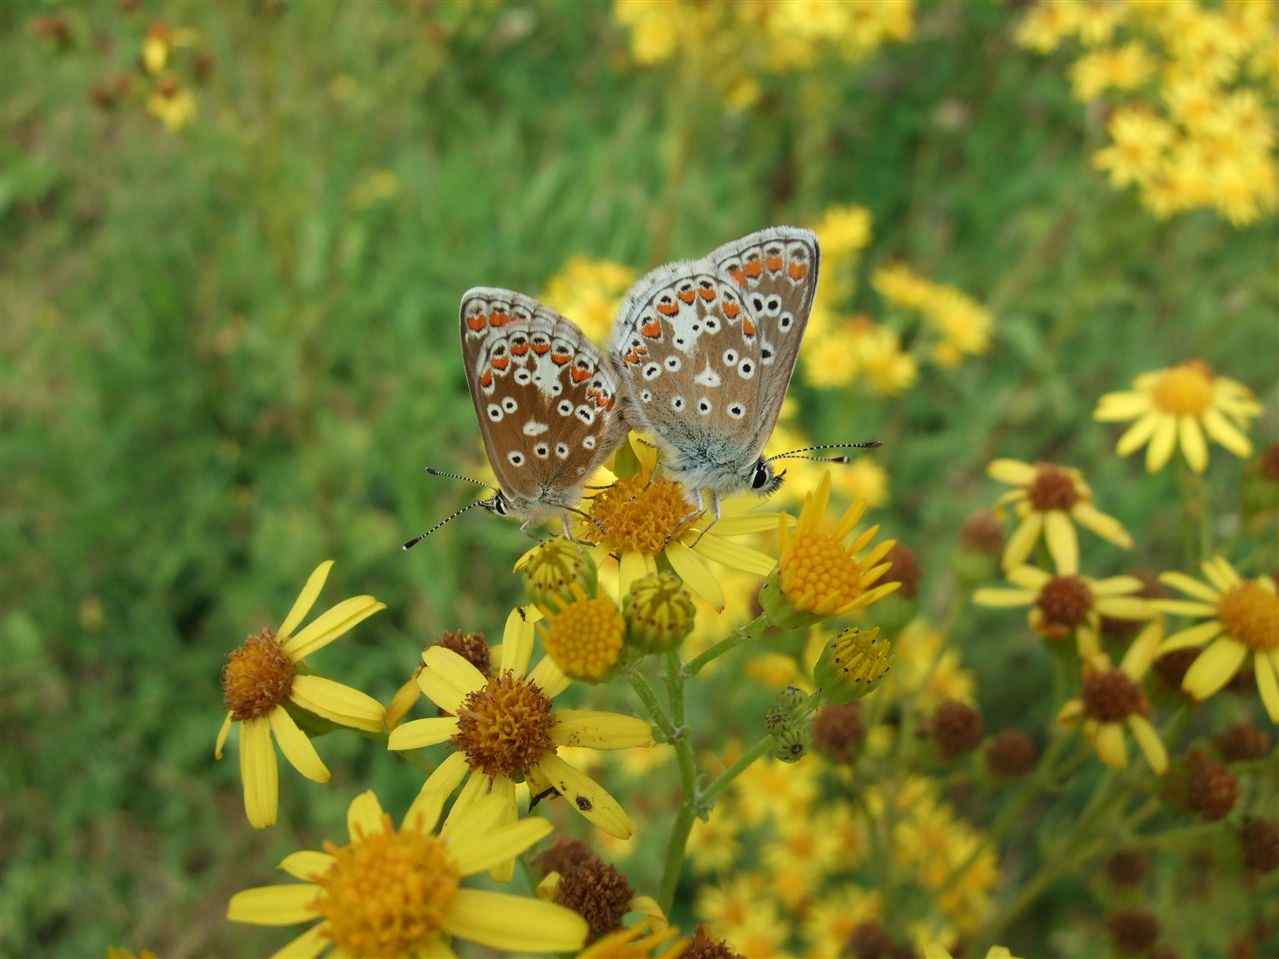 Brown Argus mating. The figure of eight rings on the hindwings are the best way to tell them apart from the female Common Blue, which do not have the figure of eight.